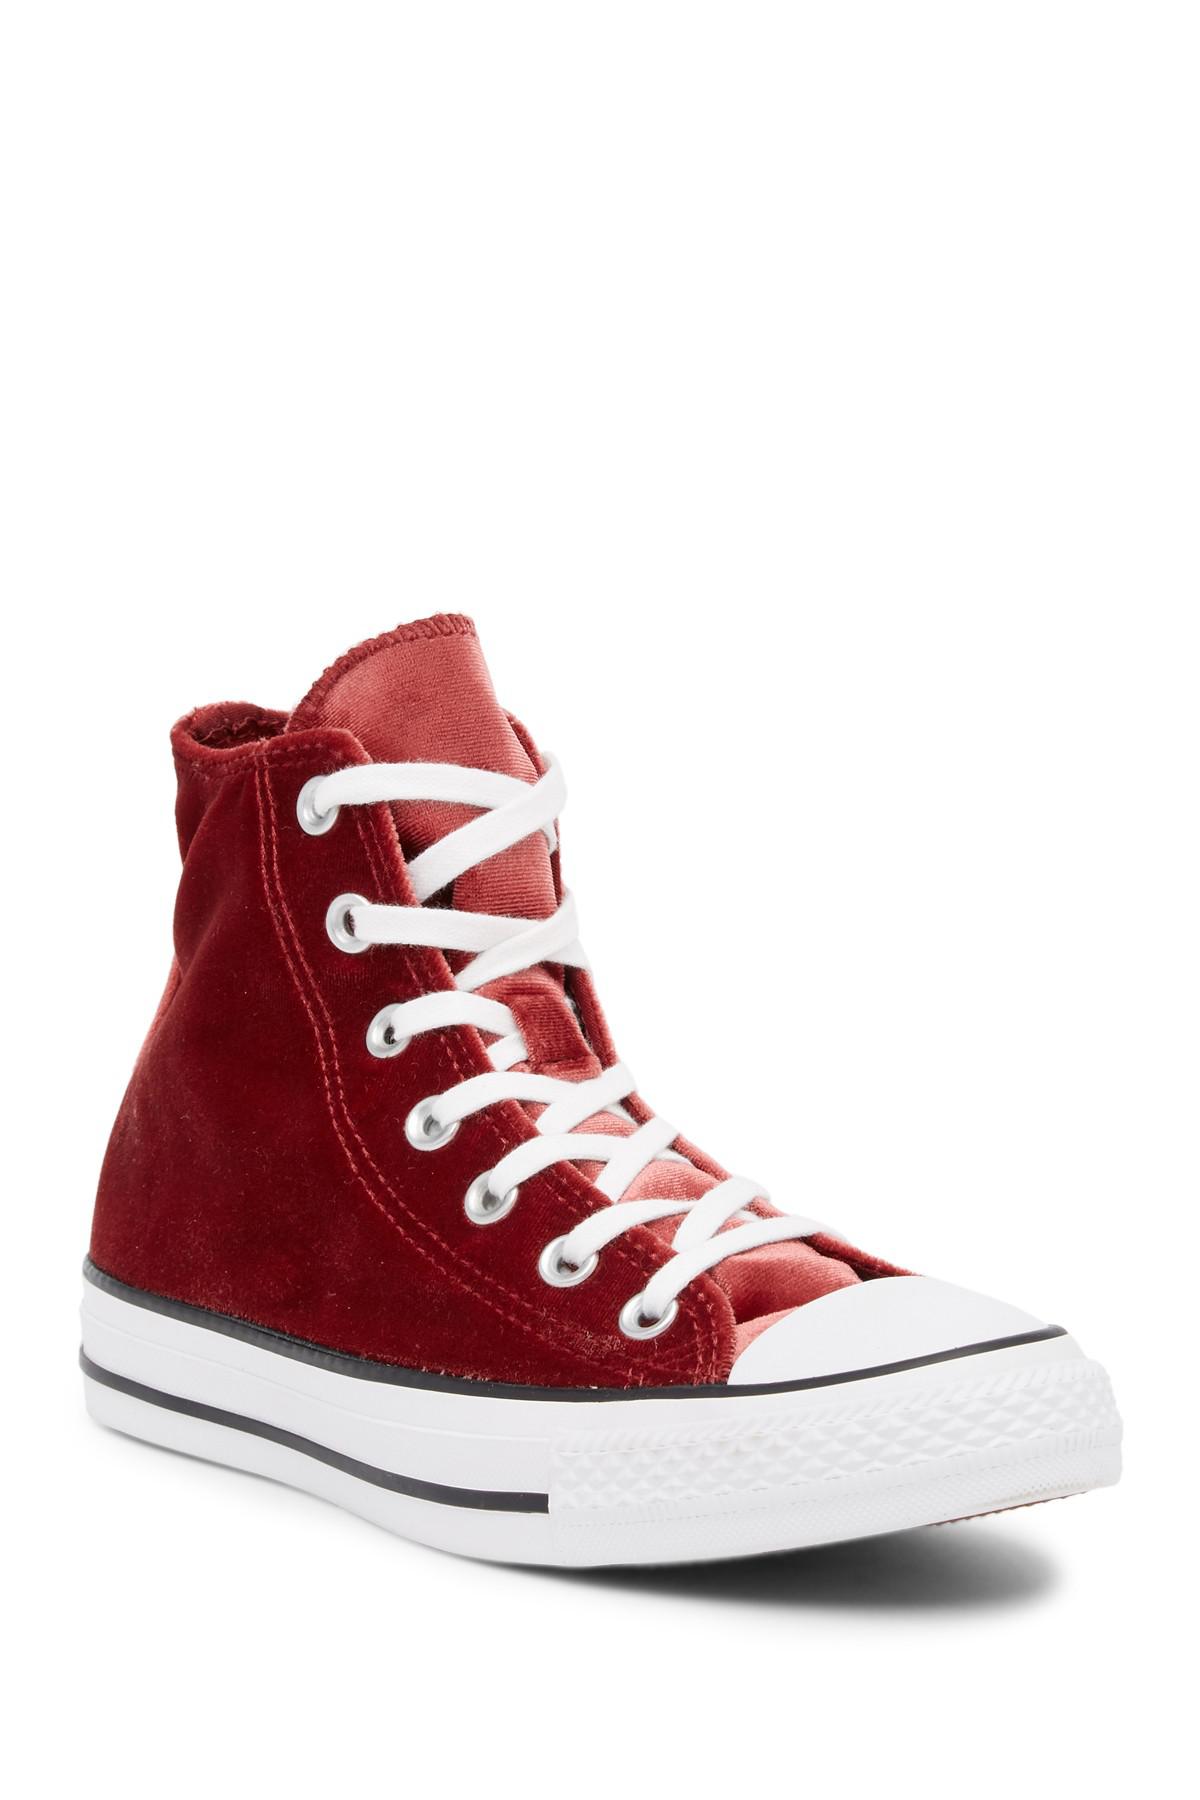 Dial Wording puzzle Converse Chuck Taylor All Star Velvet Hi Sneaker in Red | Lyst